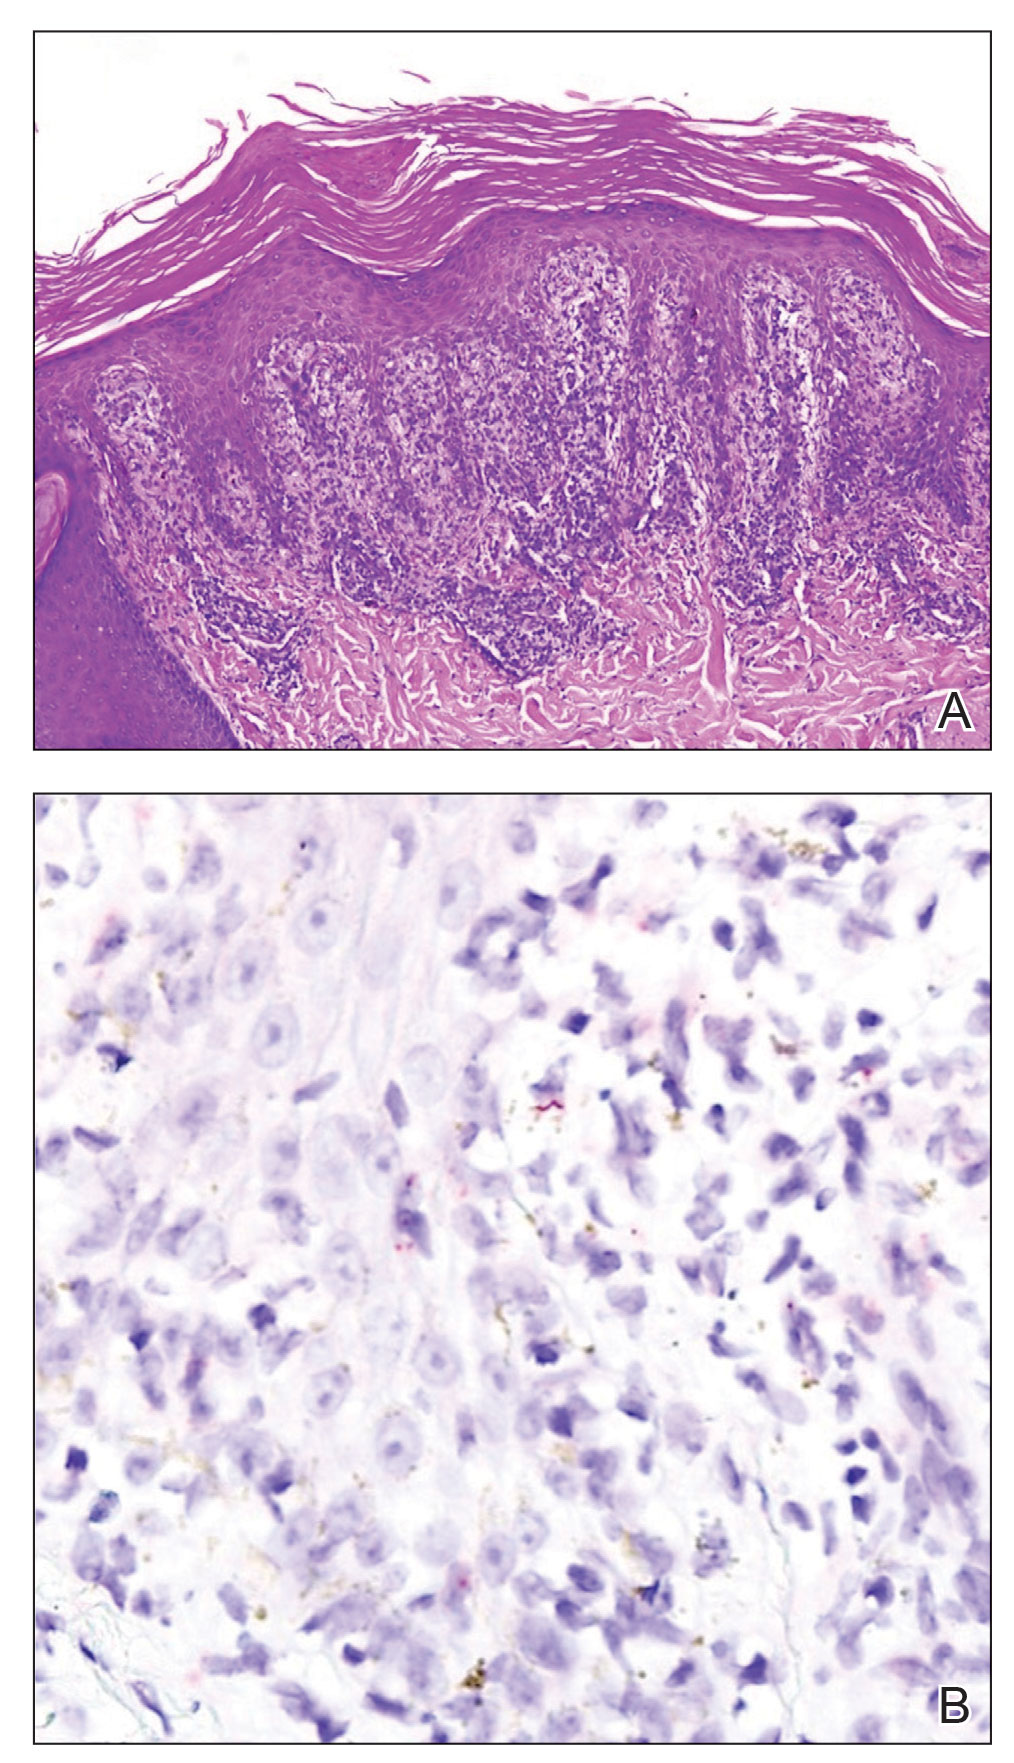 Histopathology demonstrated an interface dermatitis with psoriasiform hyperplasia and overlying parakeratosis